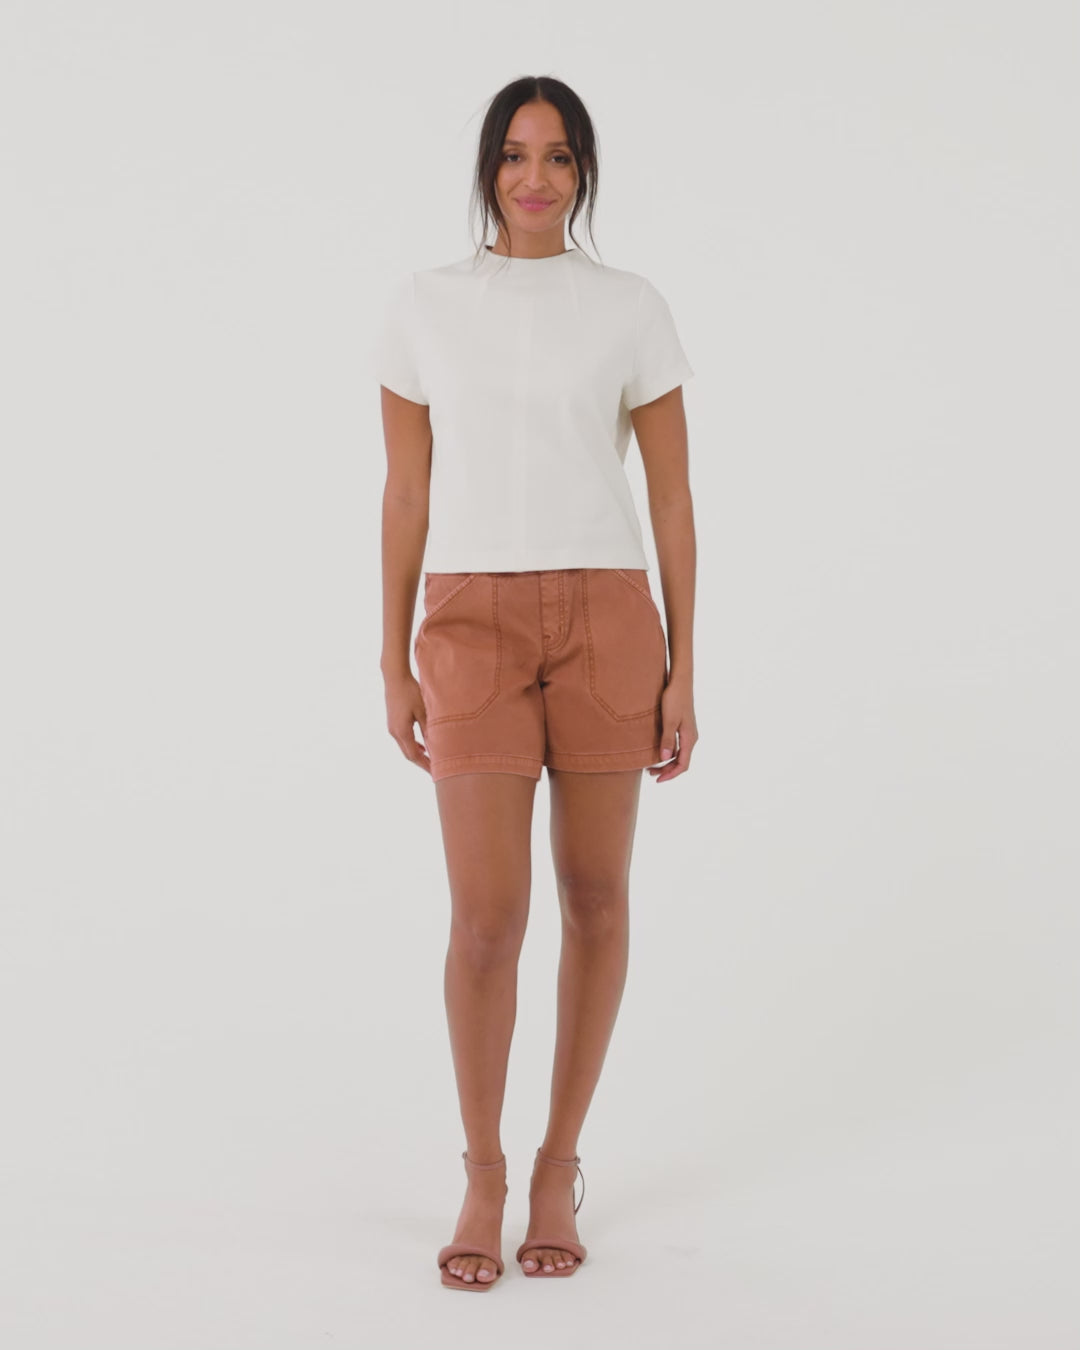 $78 SPANX Stretch Twill Pull-on Shorts 5 in Almond/khaki Size X-Large NEW!  